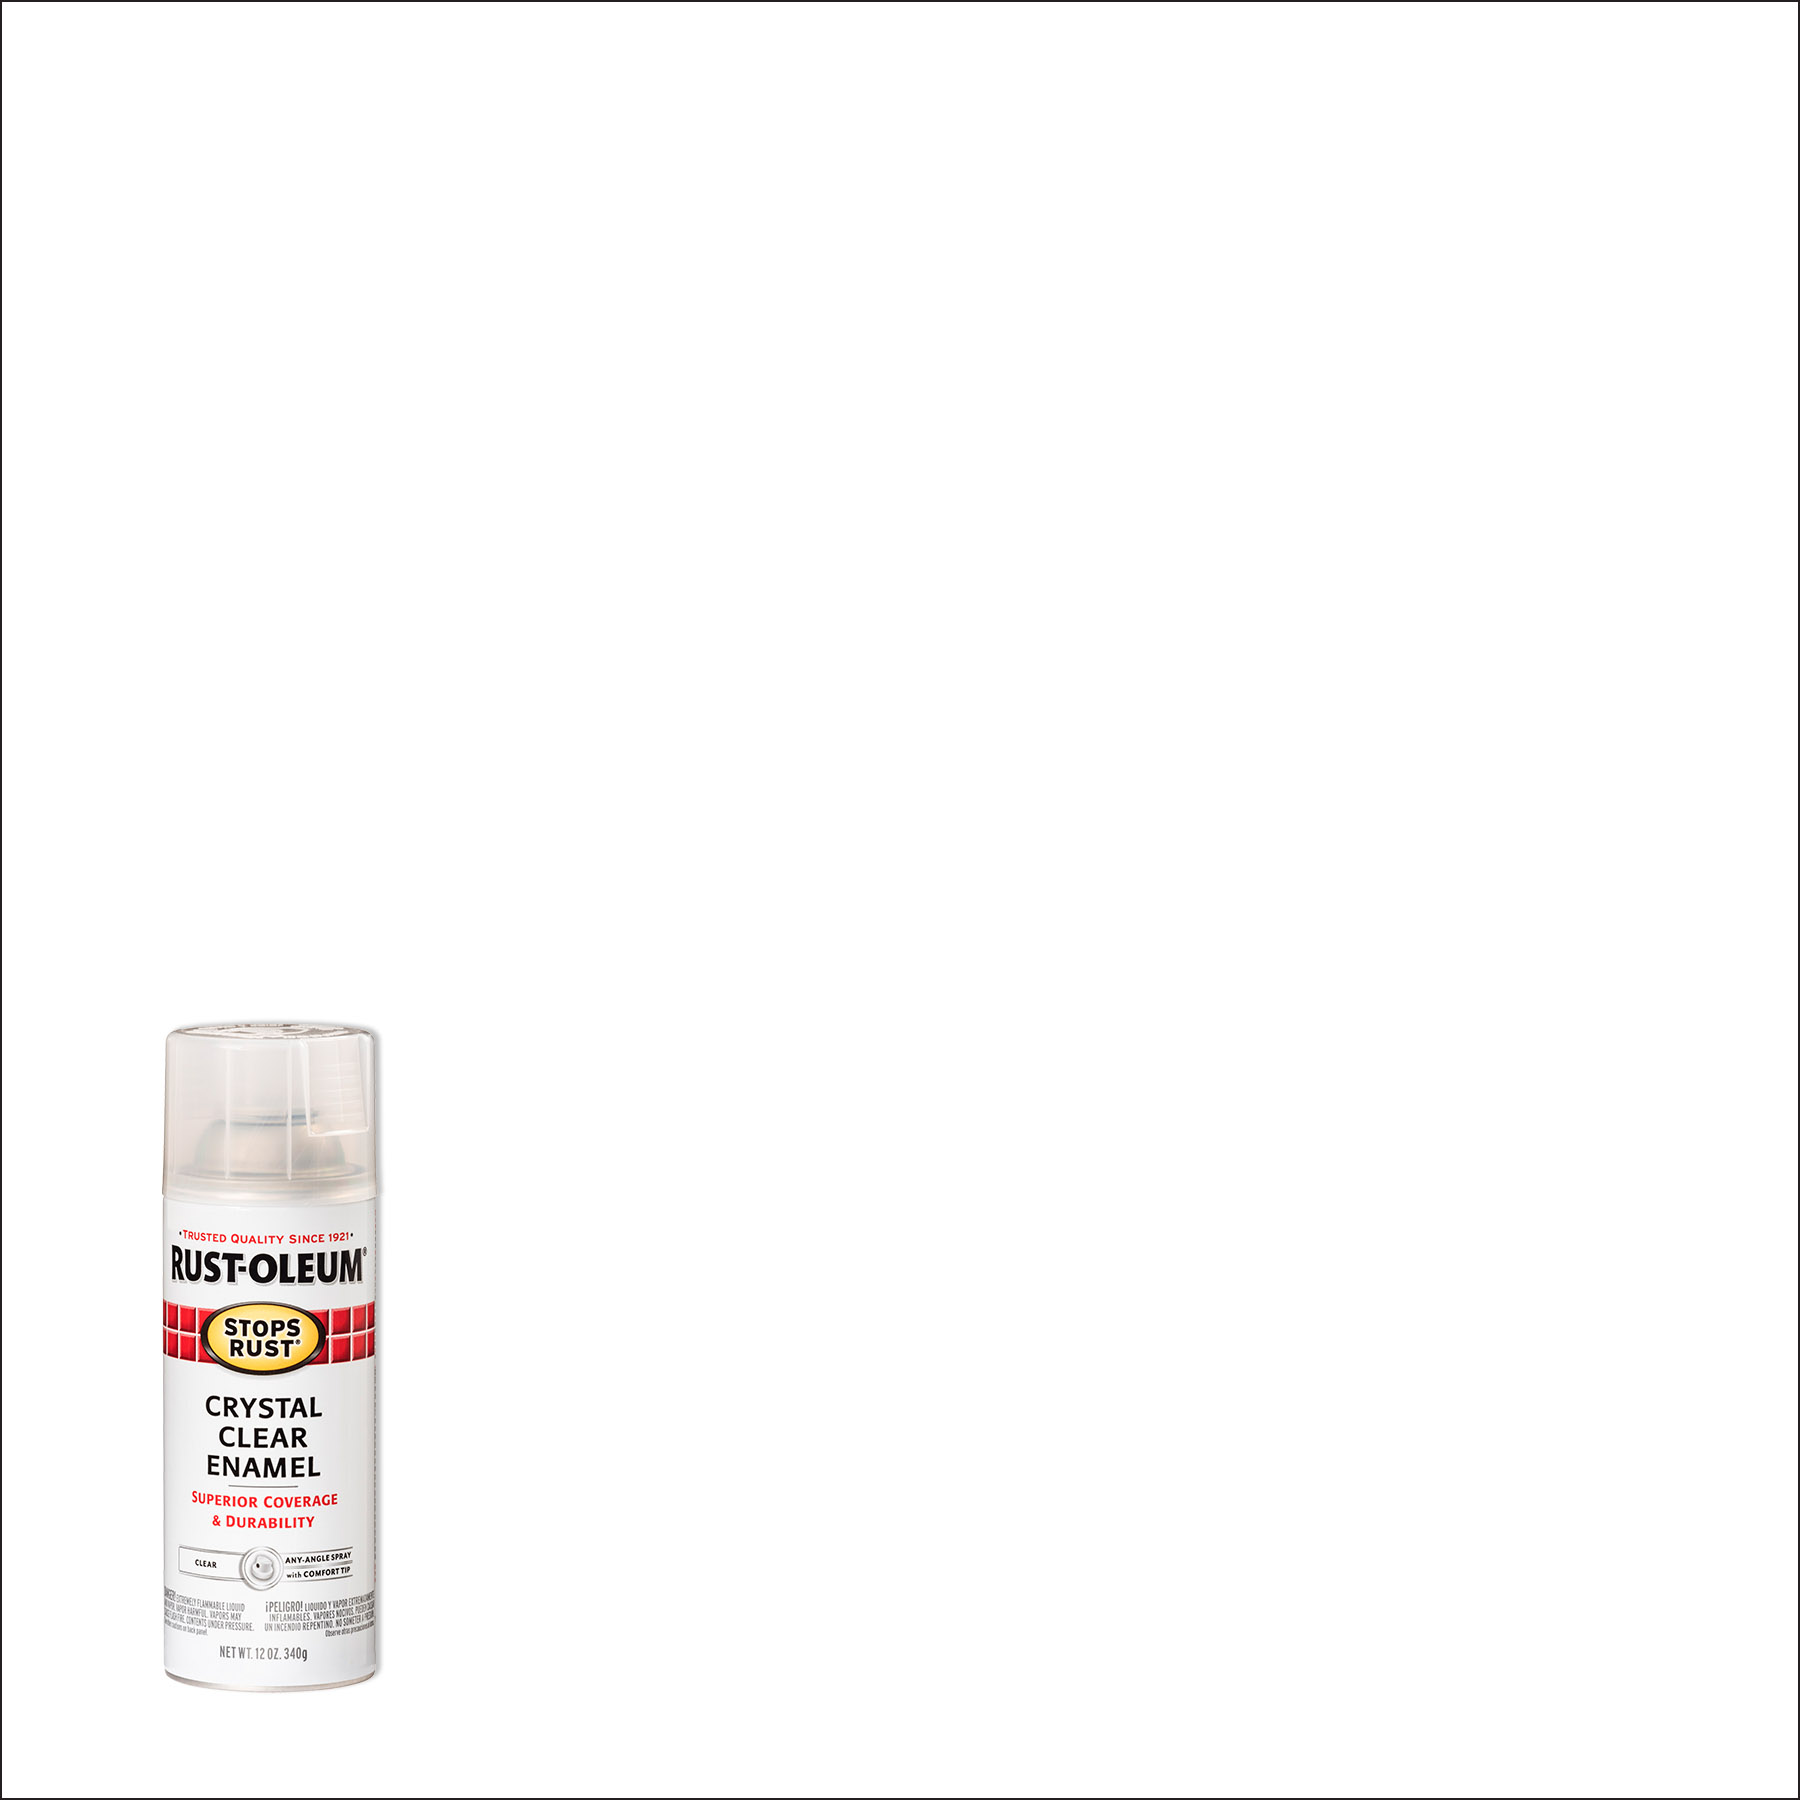 Crystal Clear, Rust-Oleum Stops Rust Gloss Protective Enamel Spray Paint-7701830, 12 oz - image 1 of 12